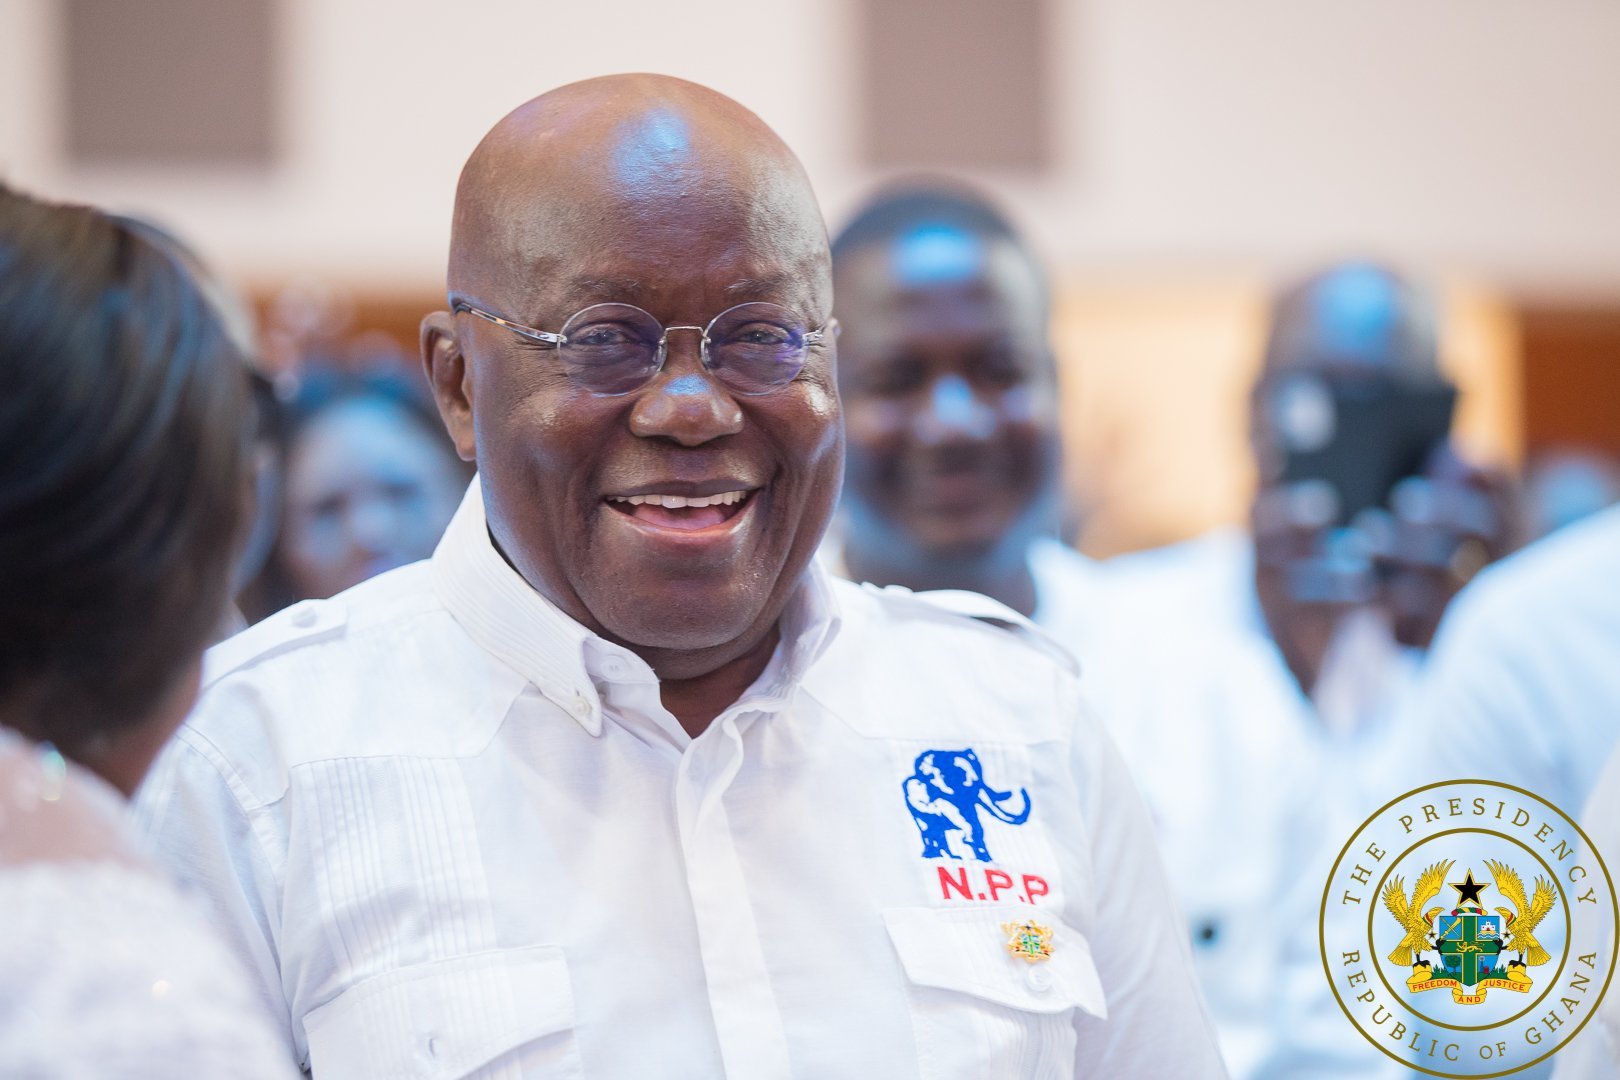 NPP 'footsoldiers' appeal to President Akufo-Addo to reshuffle appointees